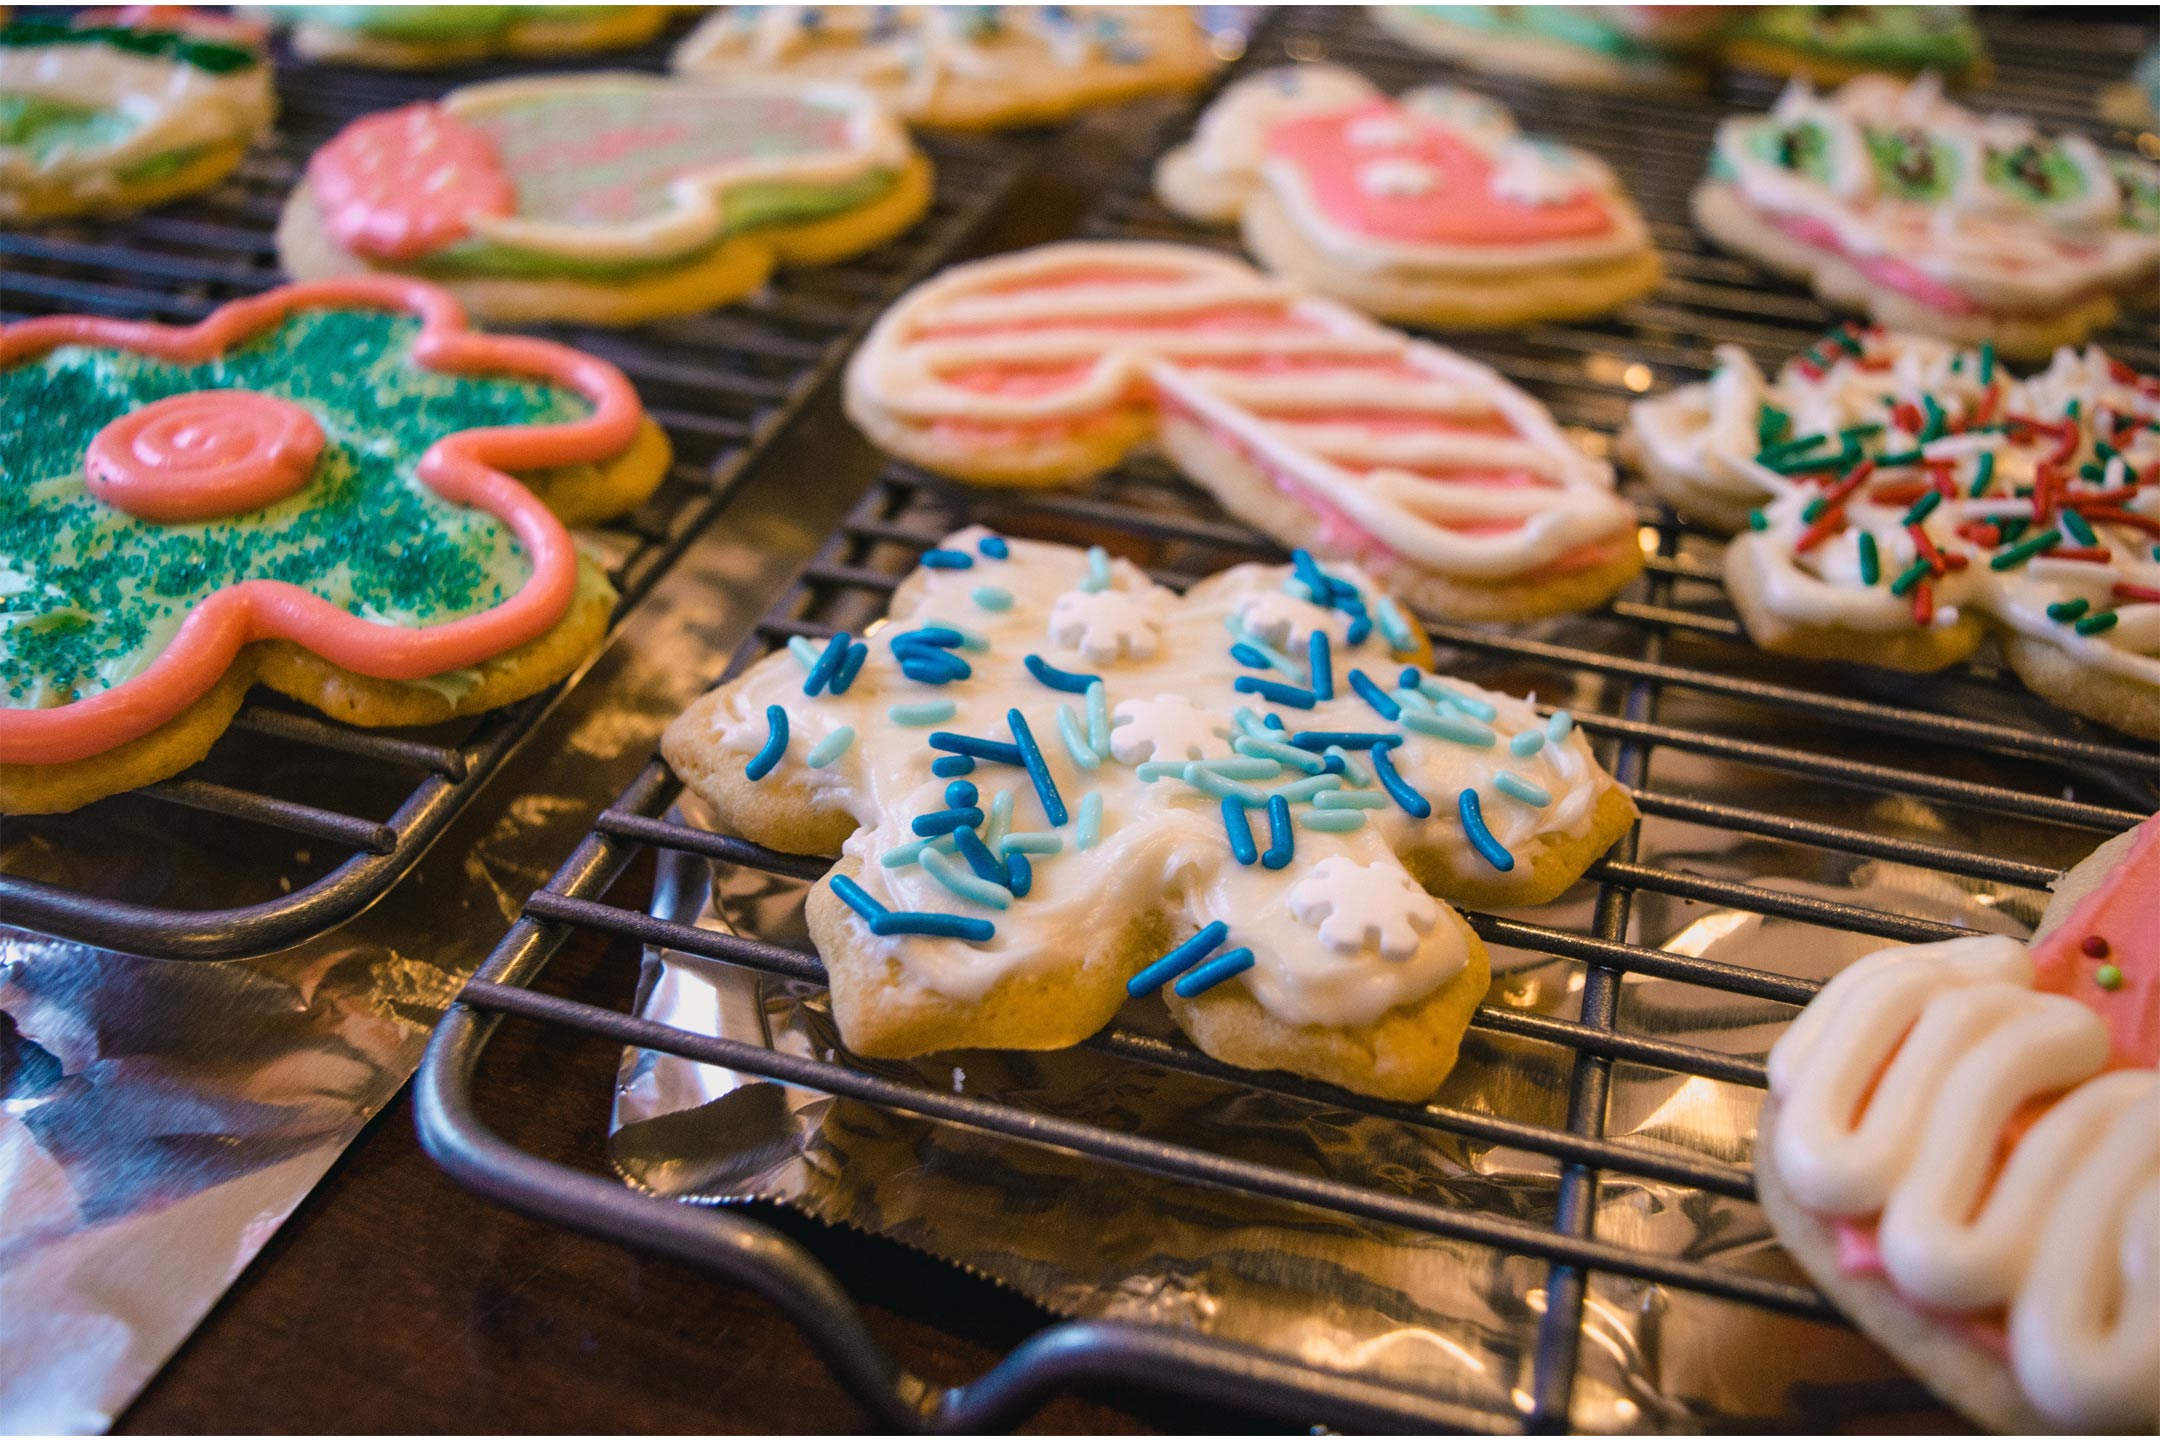 decorated-cookies2160